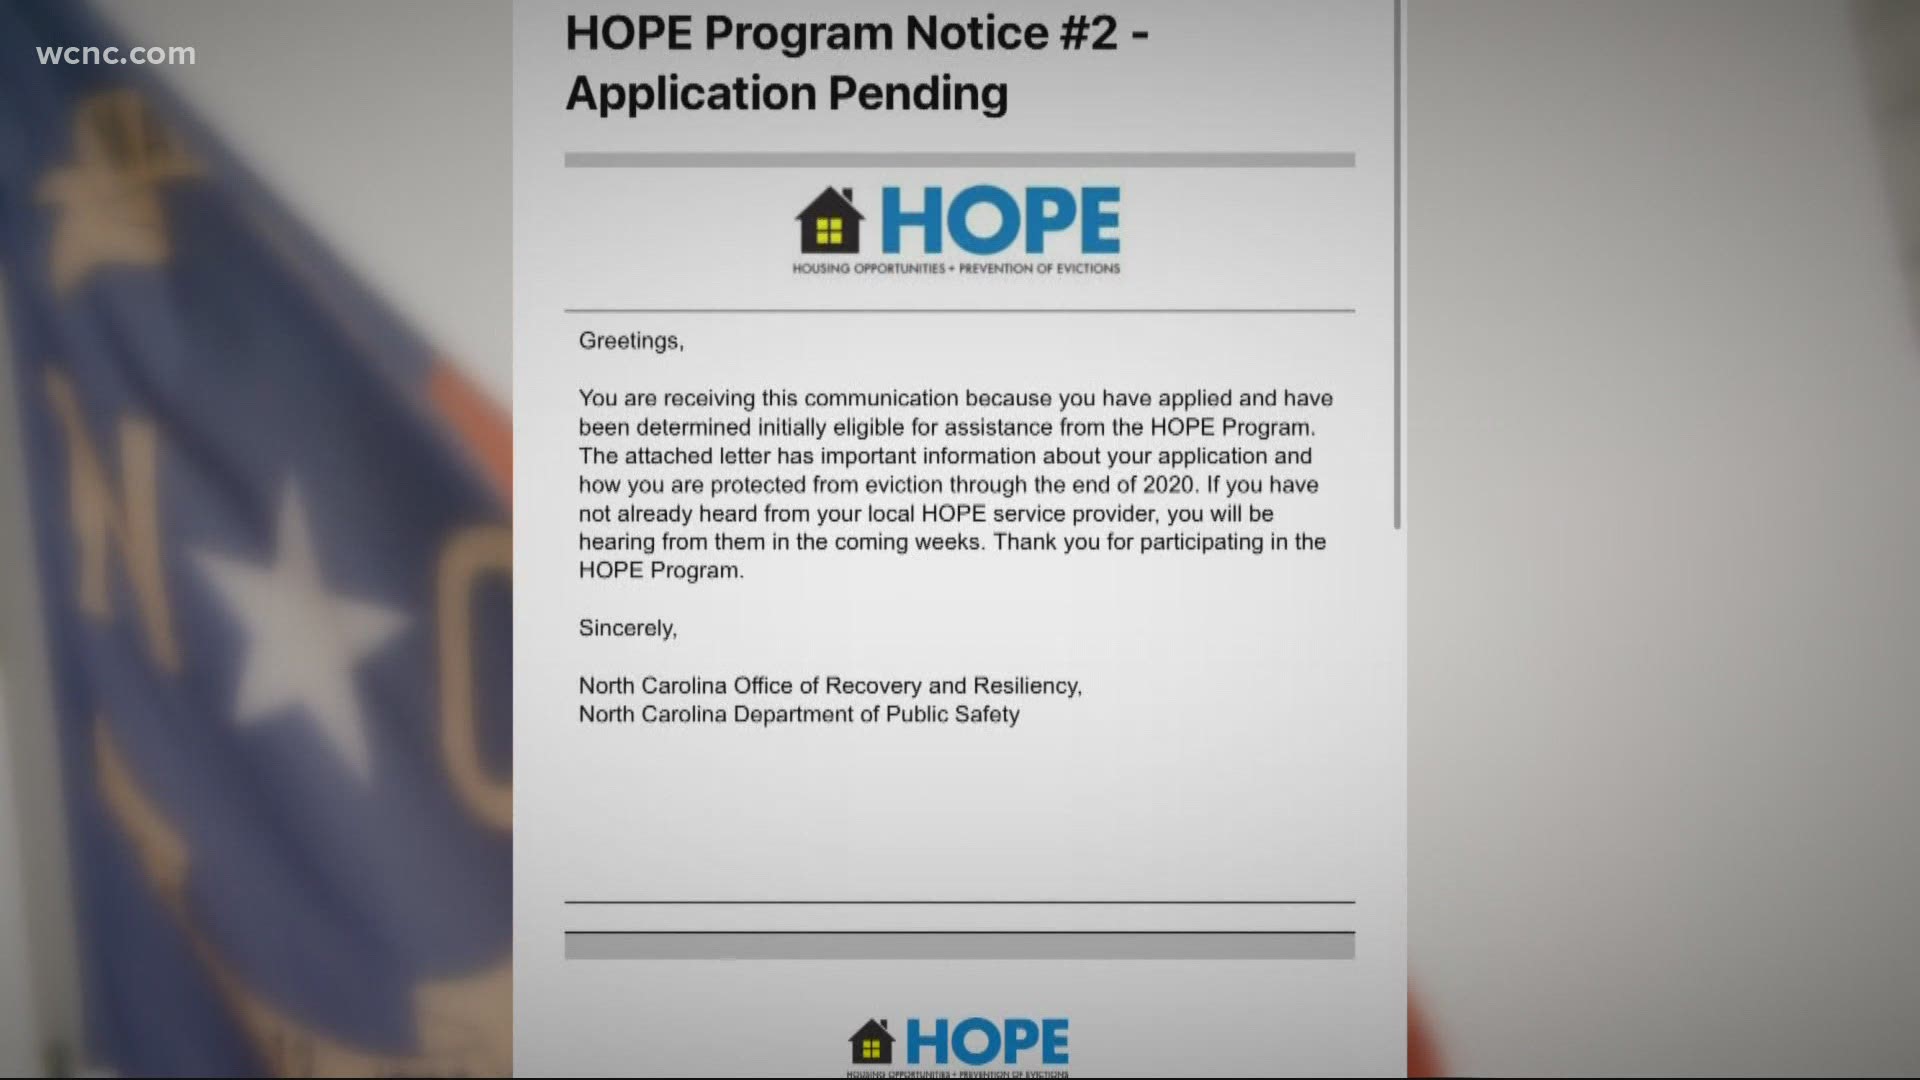 The Housing Opportunities and Prevention of Evictions (HOPE) Program is meant to help struggling families pay rent and utilities, but most haven't received it yet.